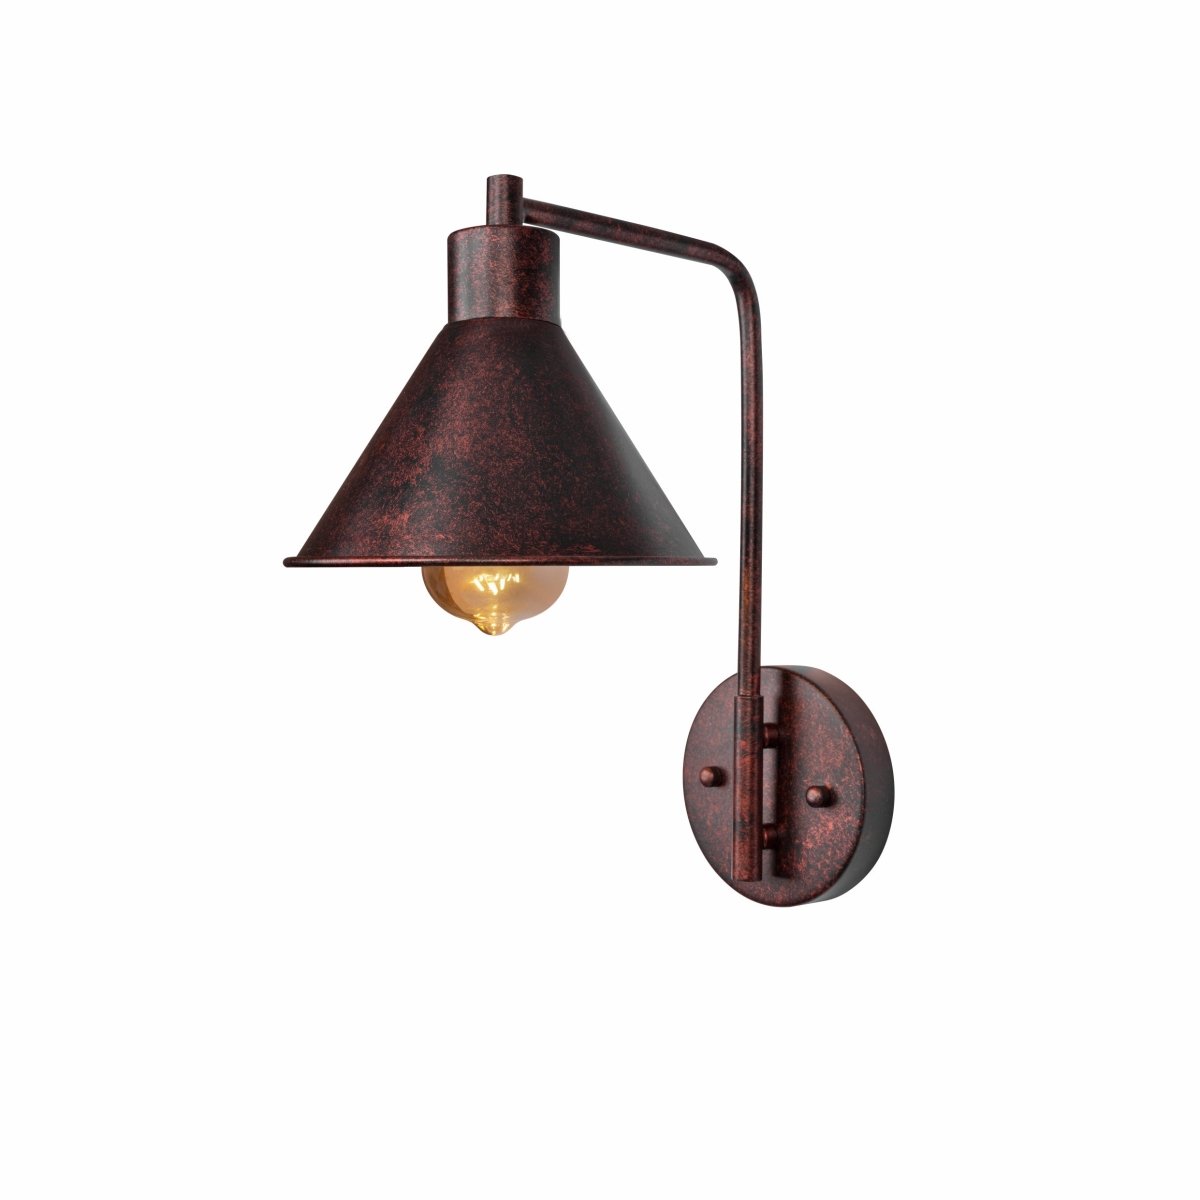 Main image of Red Bronze Metal Funnel Wall Light with E27 Fitting | TEKLED 151-19638